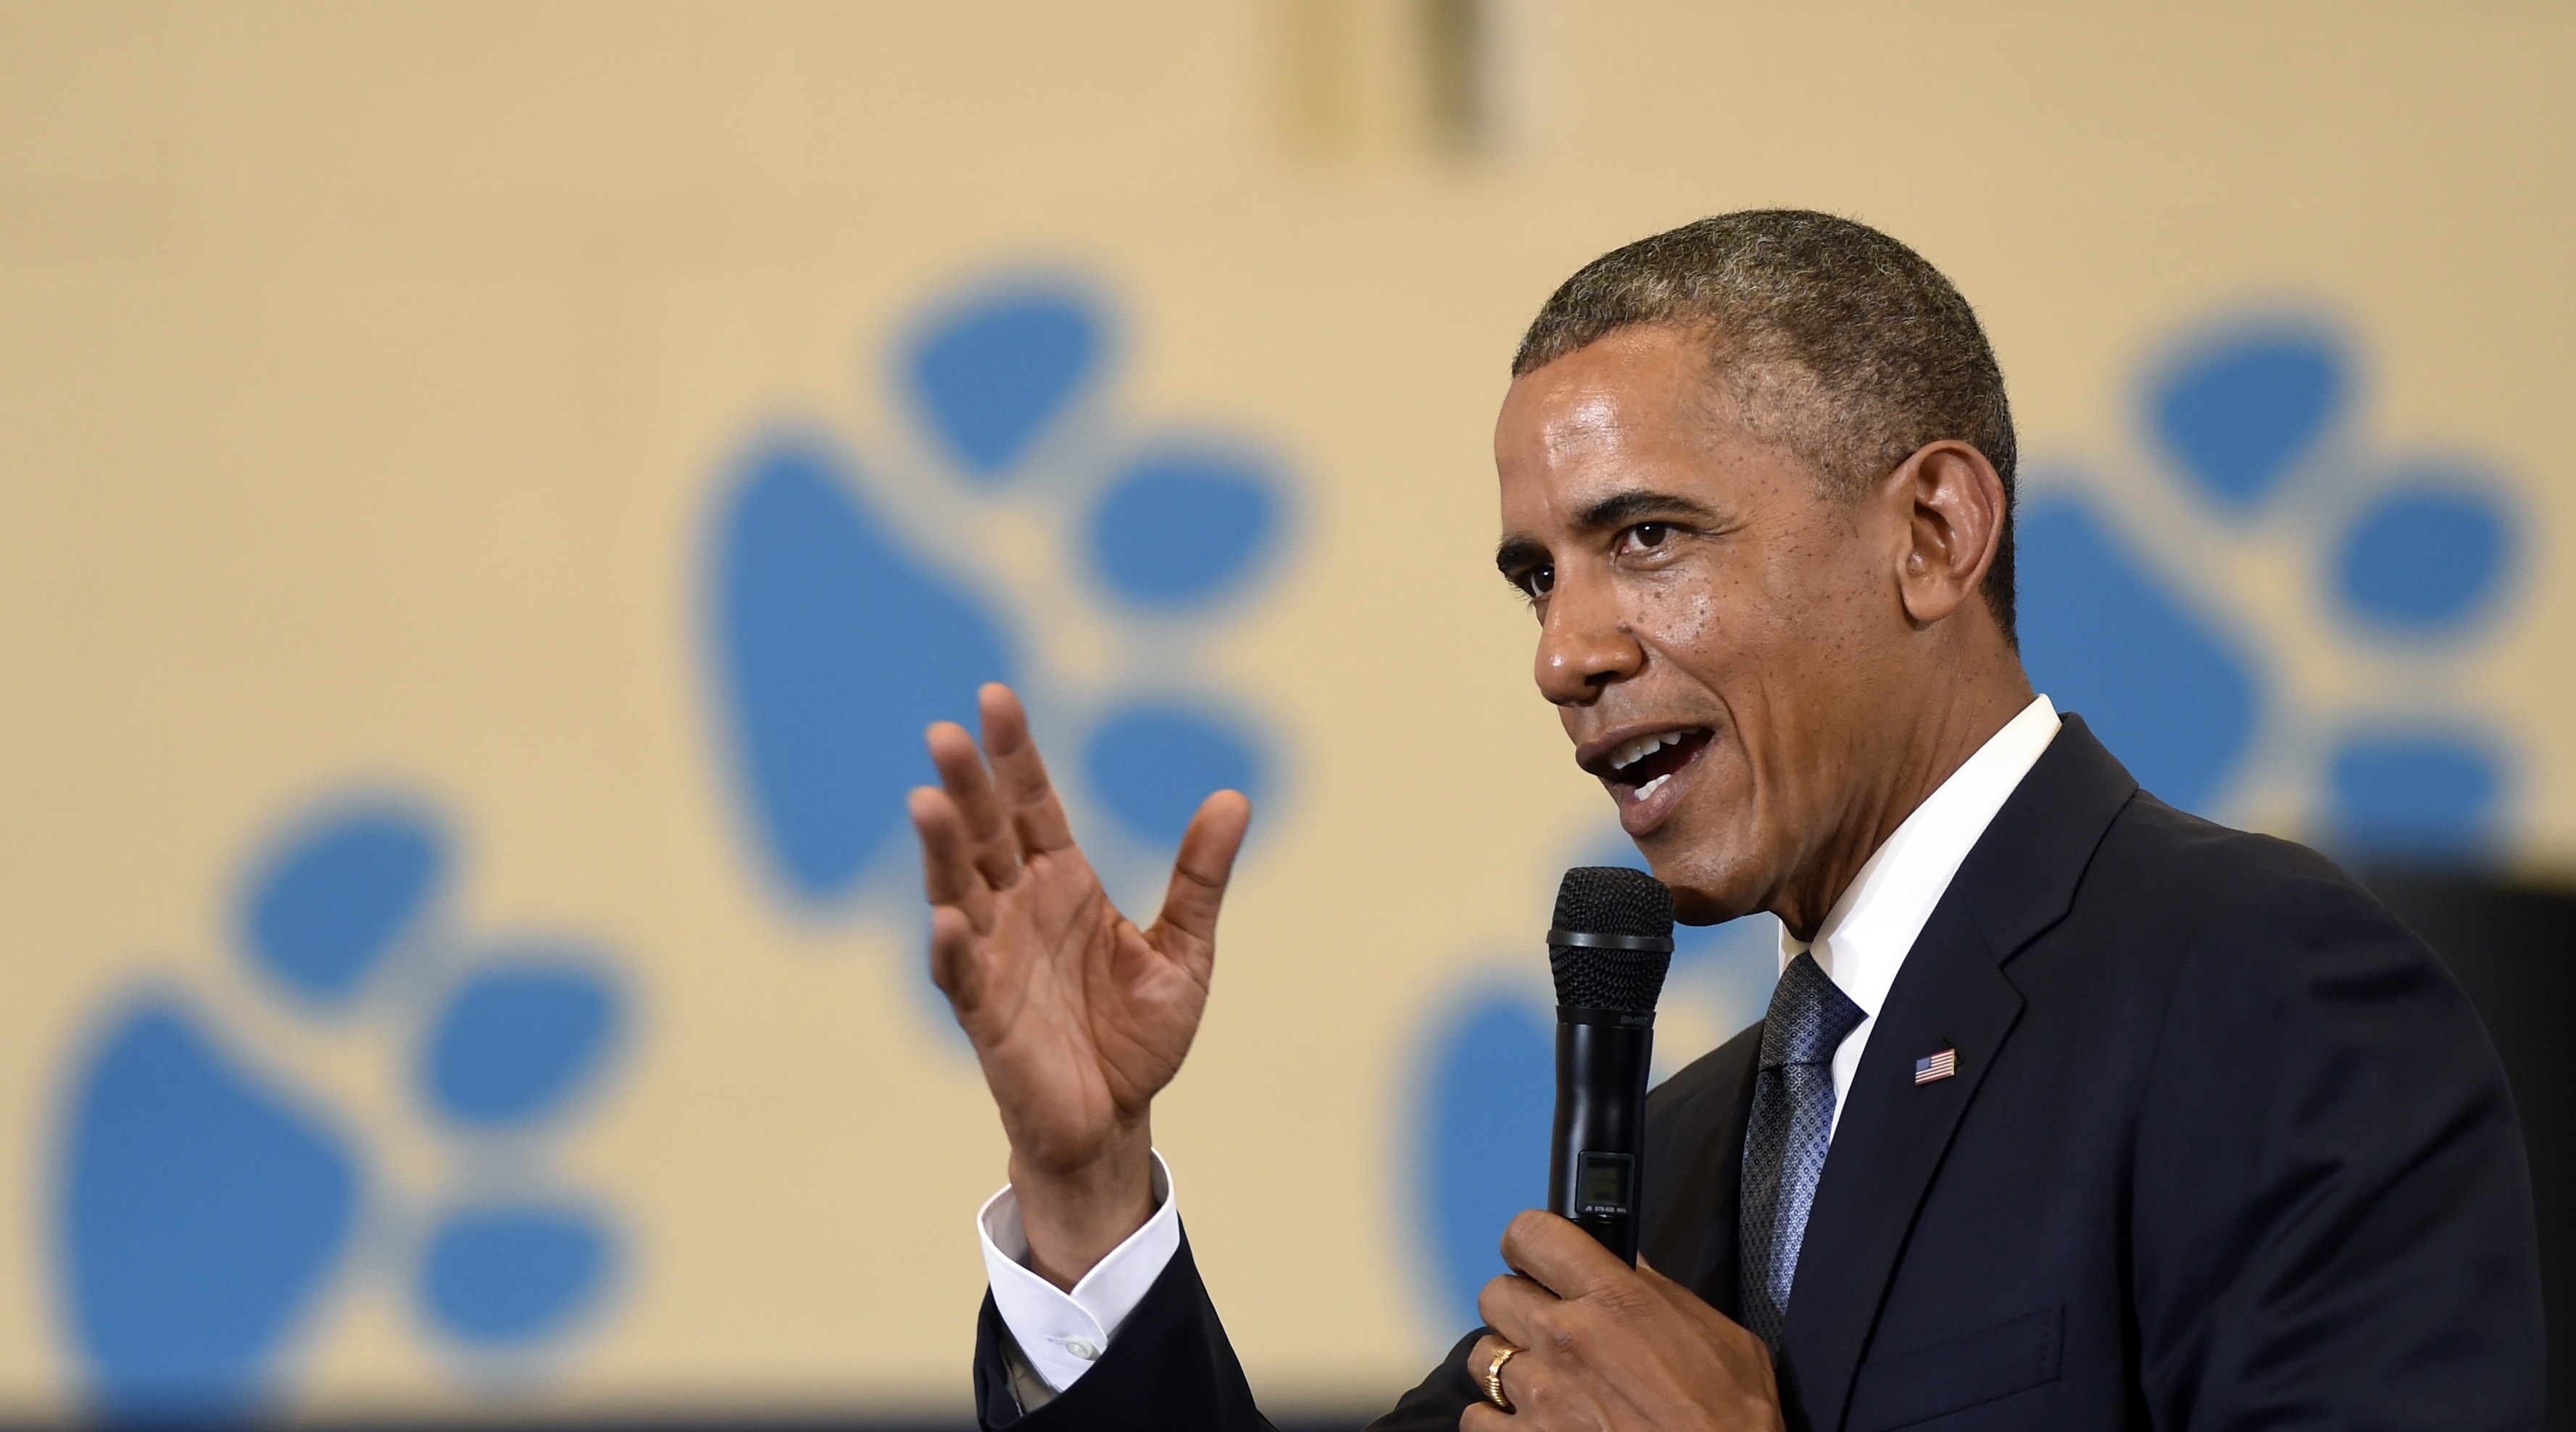 President Barack Obama speaks at an event at the Walker Jones Education Campus in Washington to announce additional commitments for "My Brothers Keeper," Obama's initiative aimed at helping boys and young men of color. (Susan Walsh&mdash;AP)